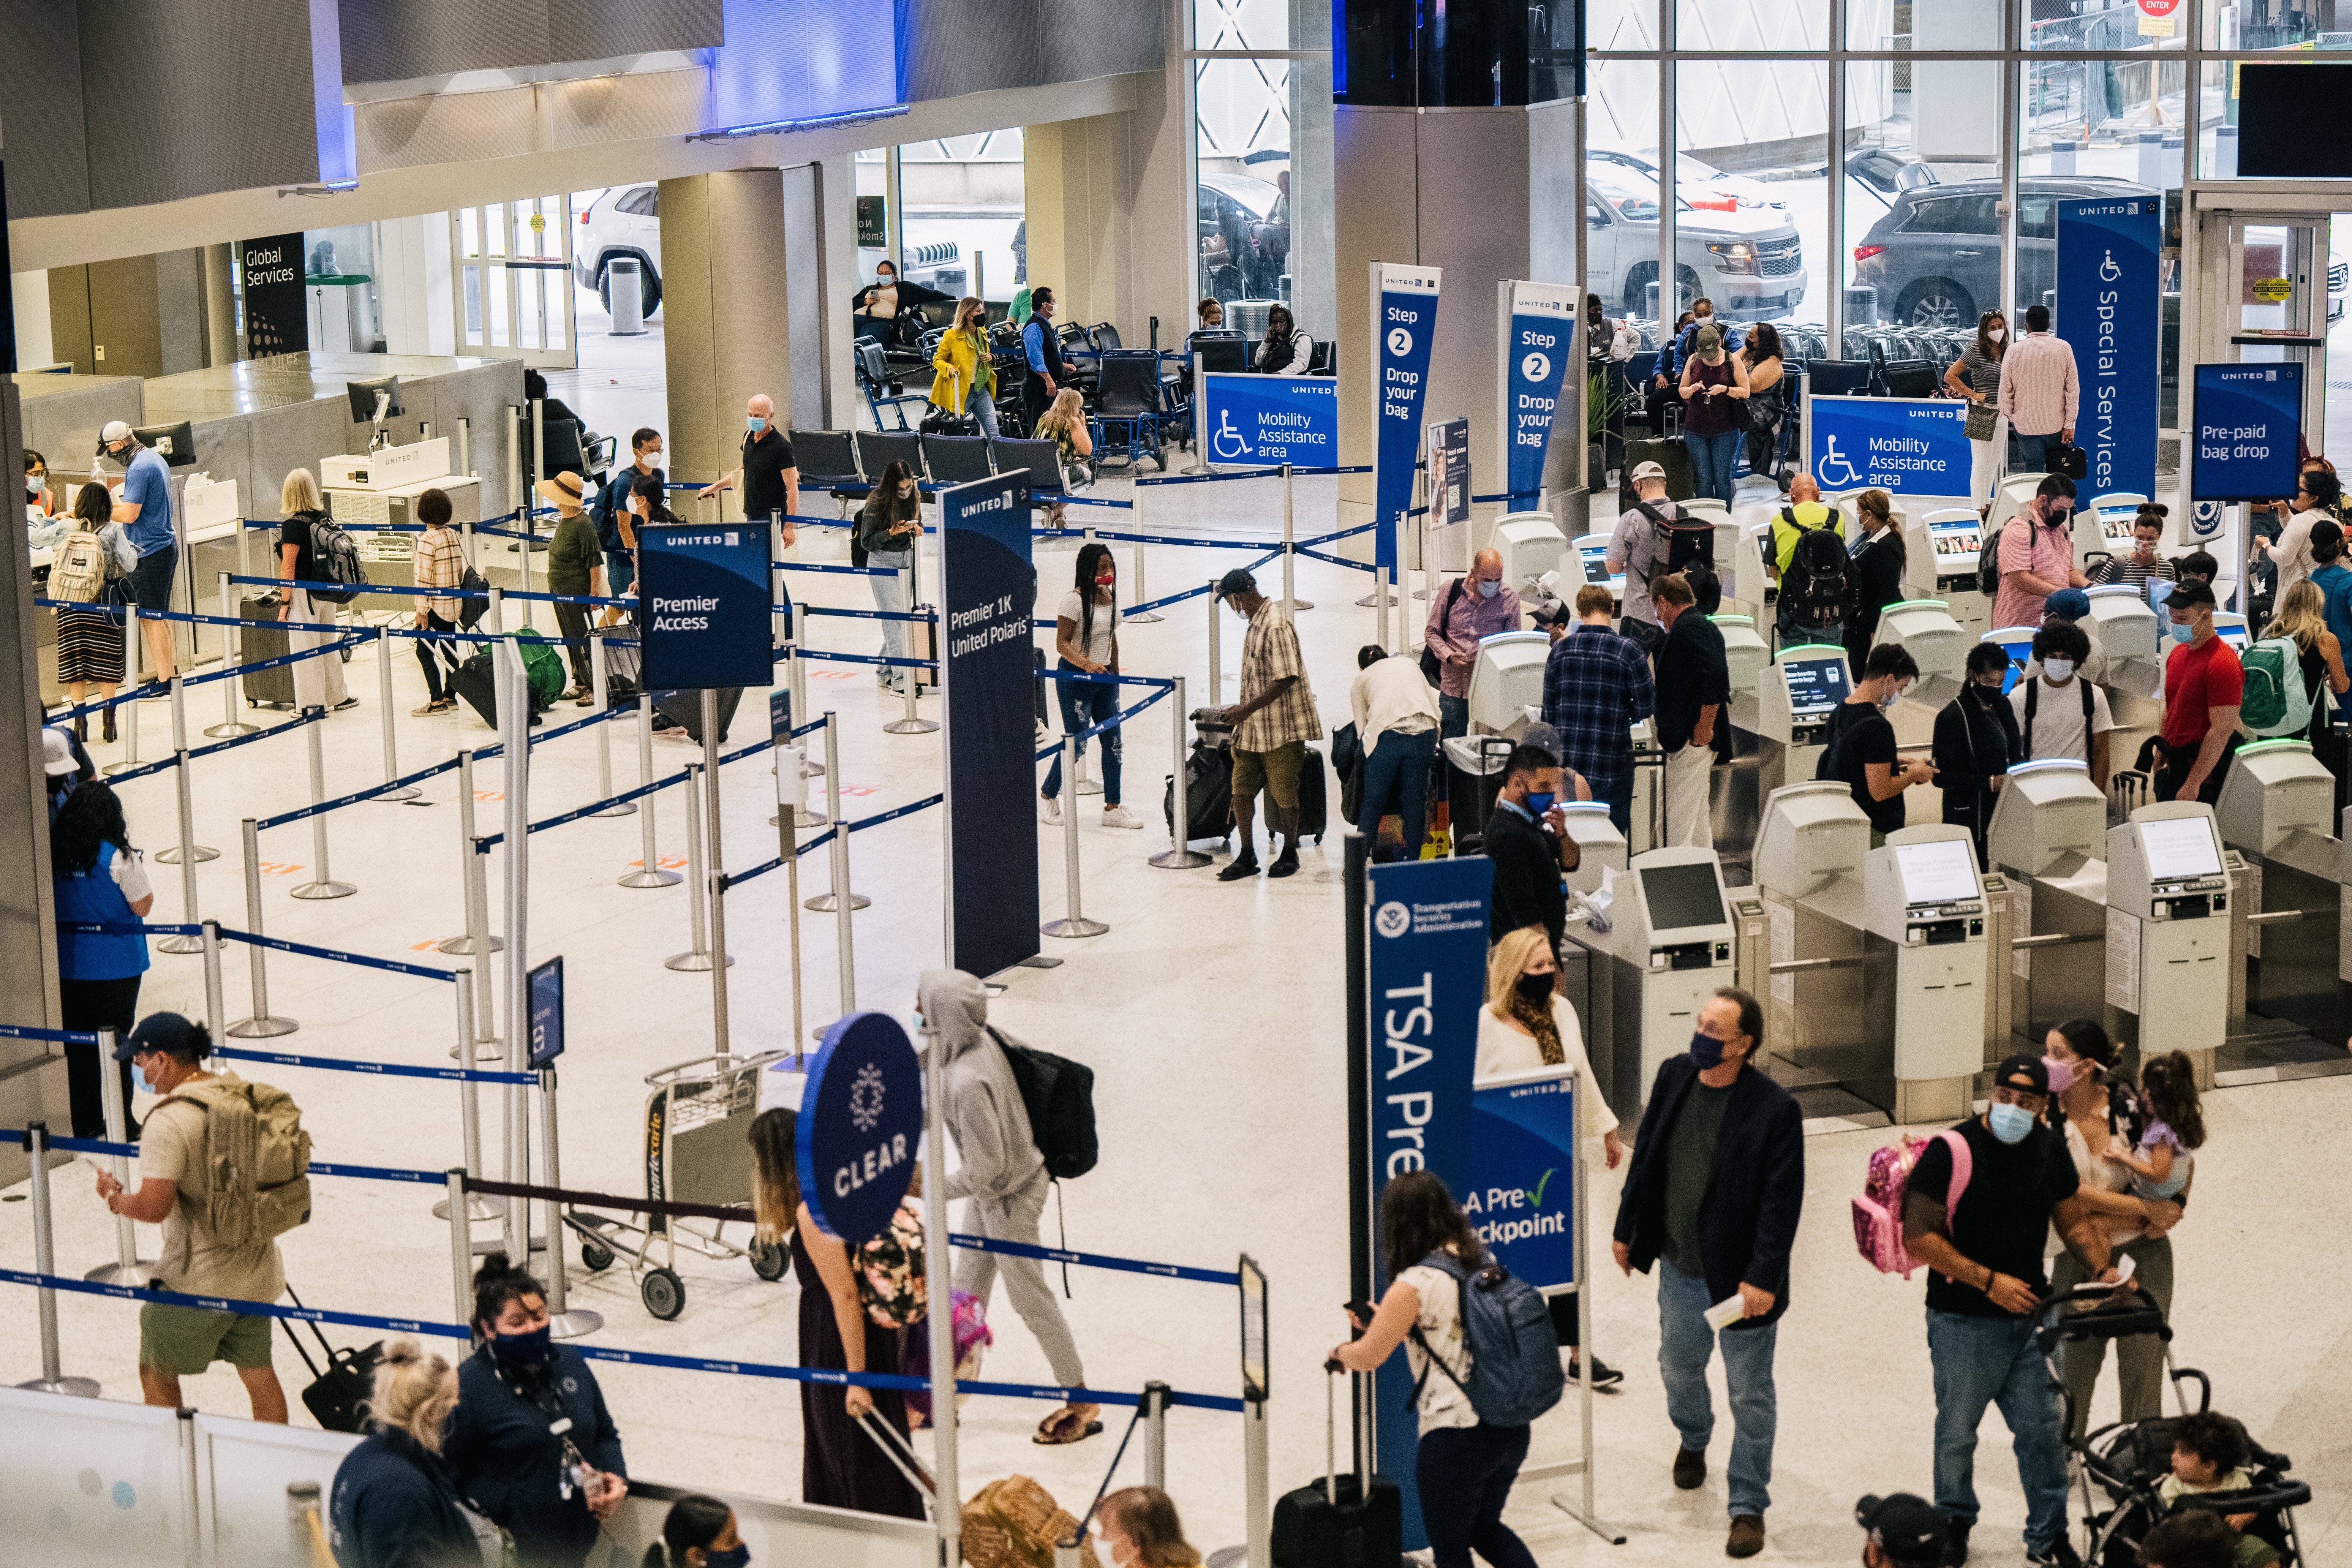 The student was interrogated by US law enforcement at Houston Airport. Photo: Getty Images